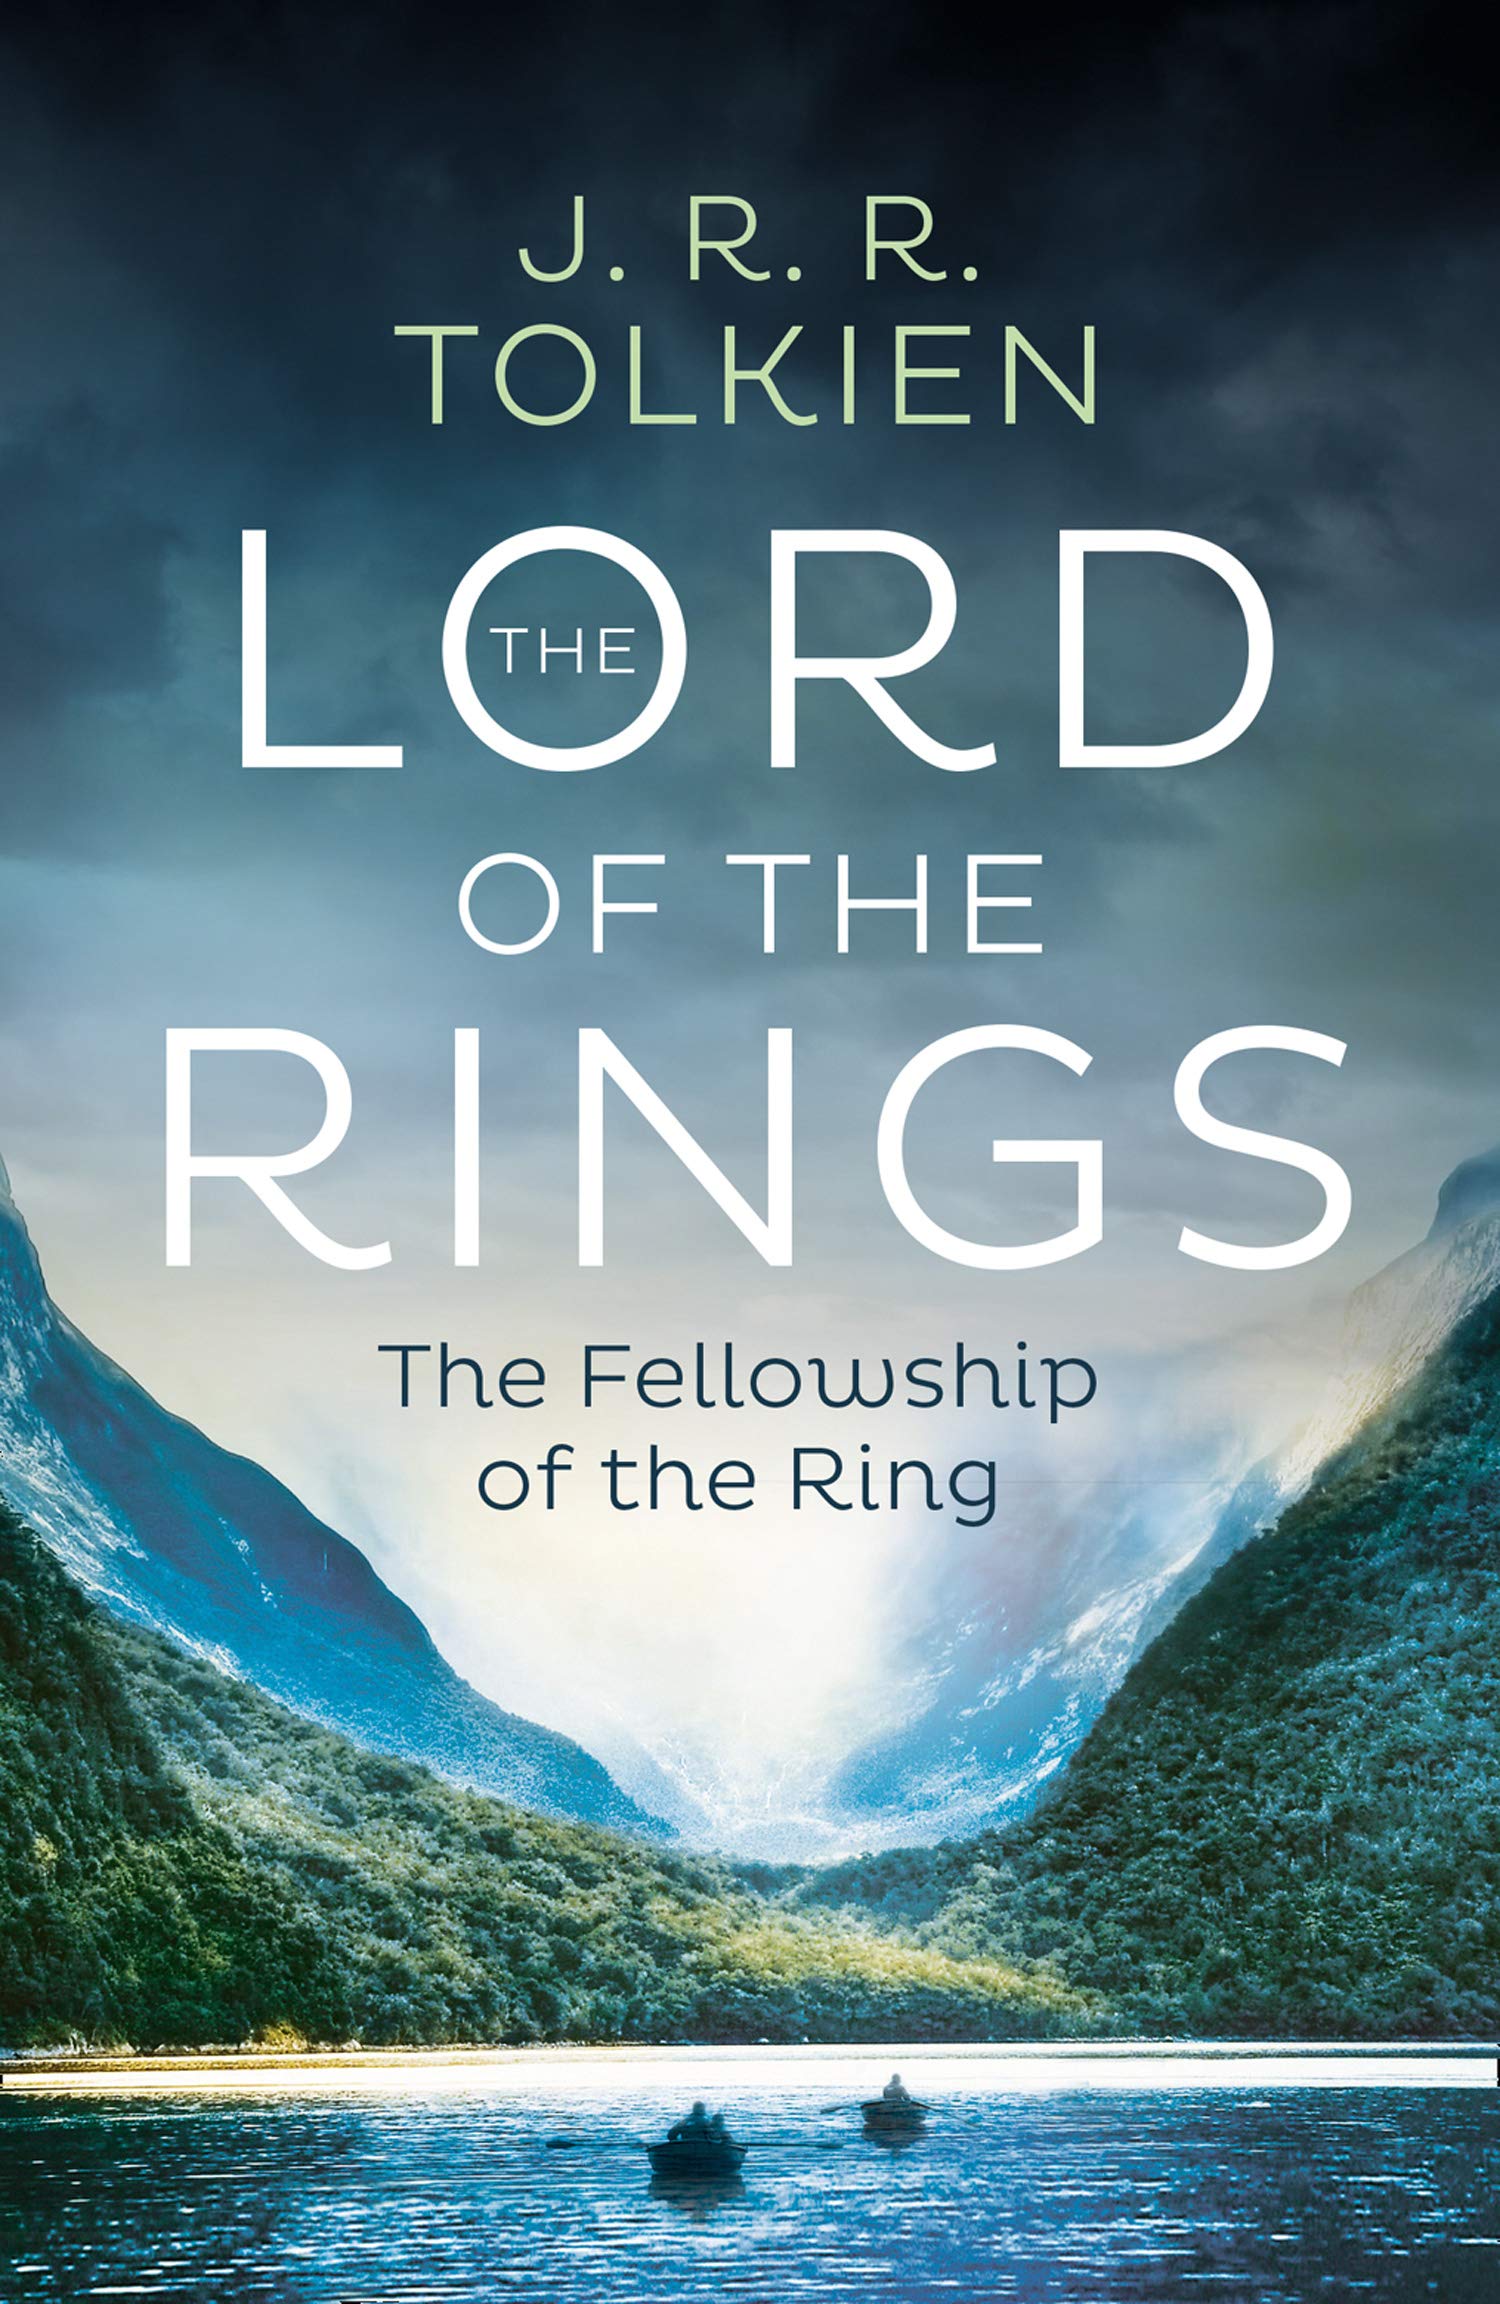 THE LORD OF THE RINGS (1) — THE FELLOWSHIP OF THE RING